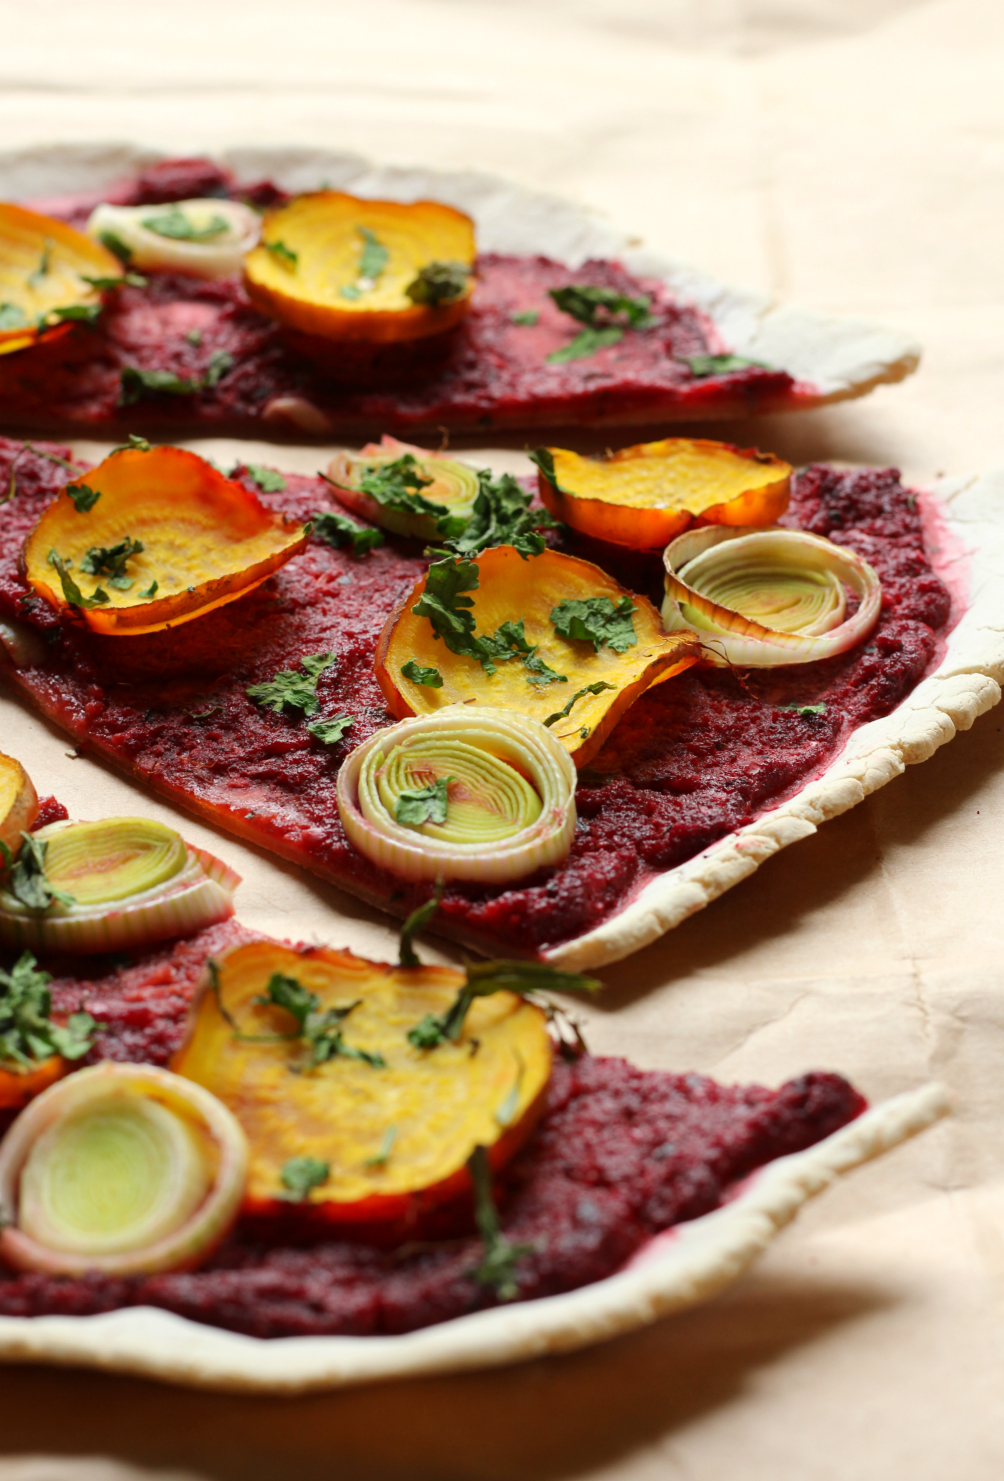 Beet & Leek Cassava Crust Pizza | Strength and Sunshine @RebeccaGF666 It's pizza time! A healthy beet & leek cassava crust pizza that's gluten-free, vegan, nut-free, and paleo. A fantastic whole food pizza recipe for a weeknight dinner, but fancy enough for a date night!